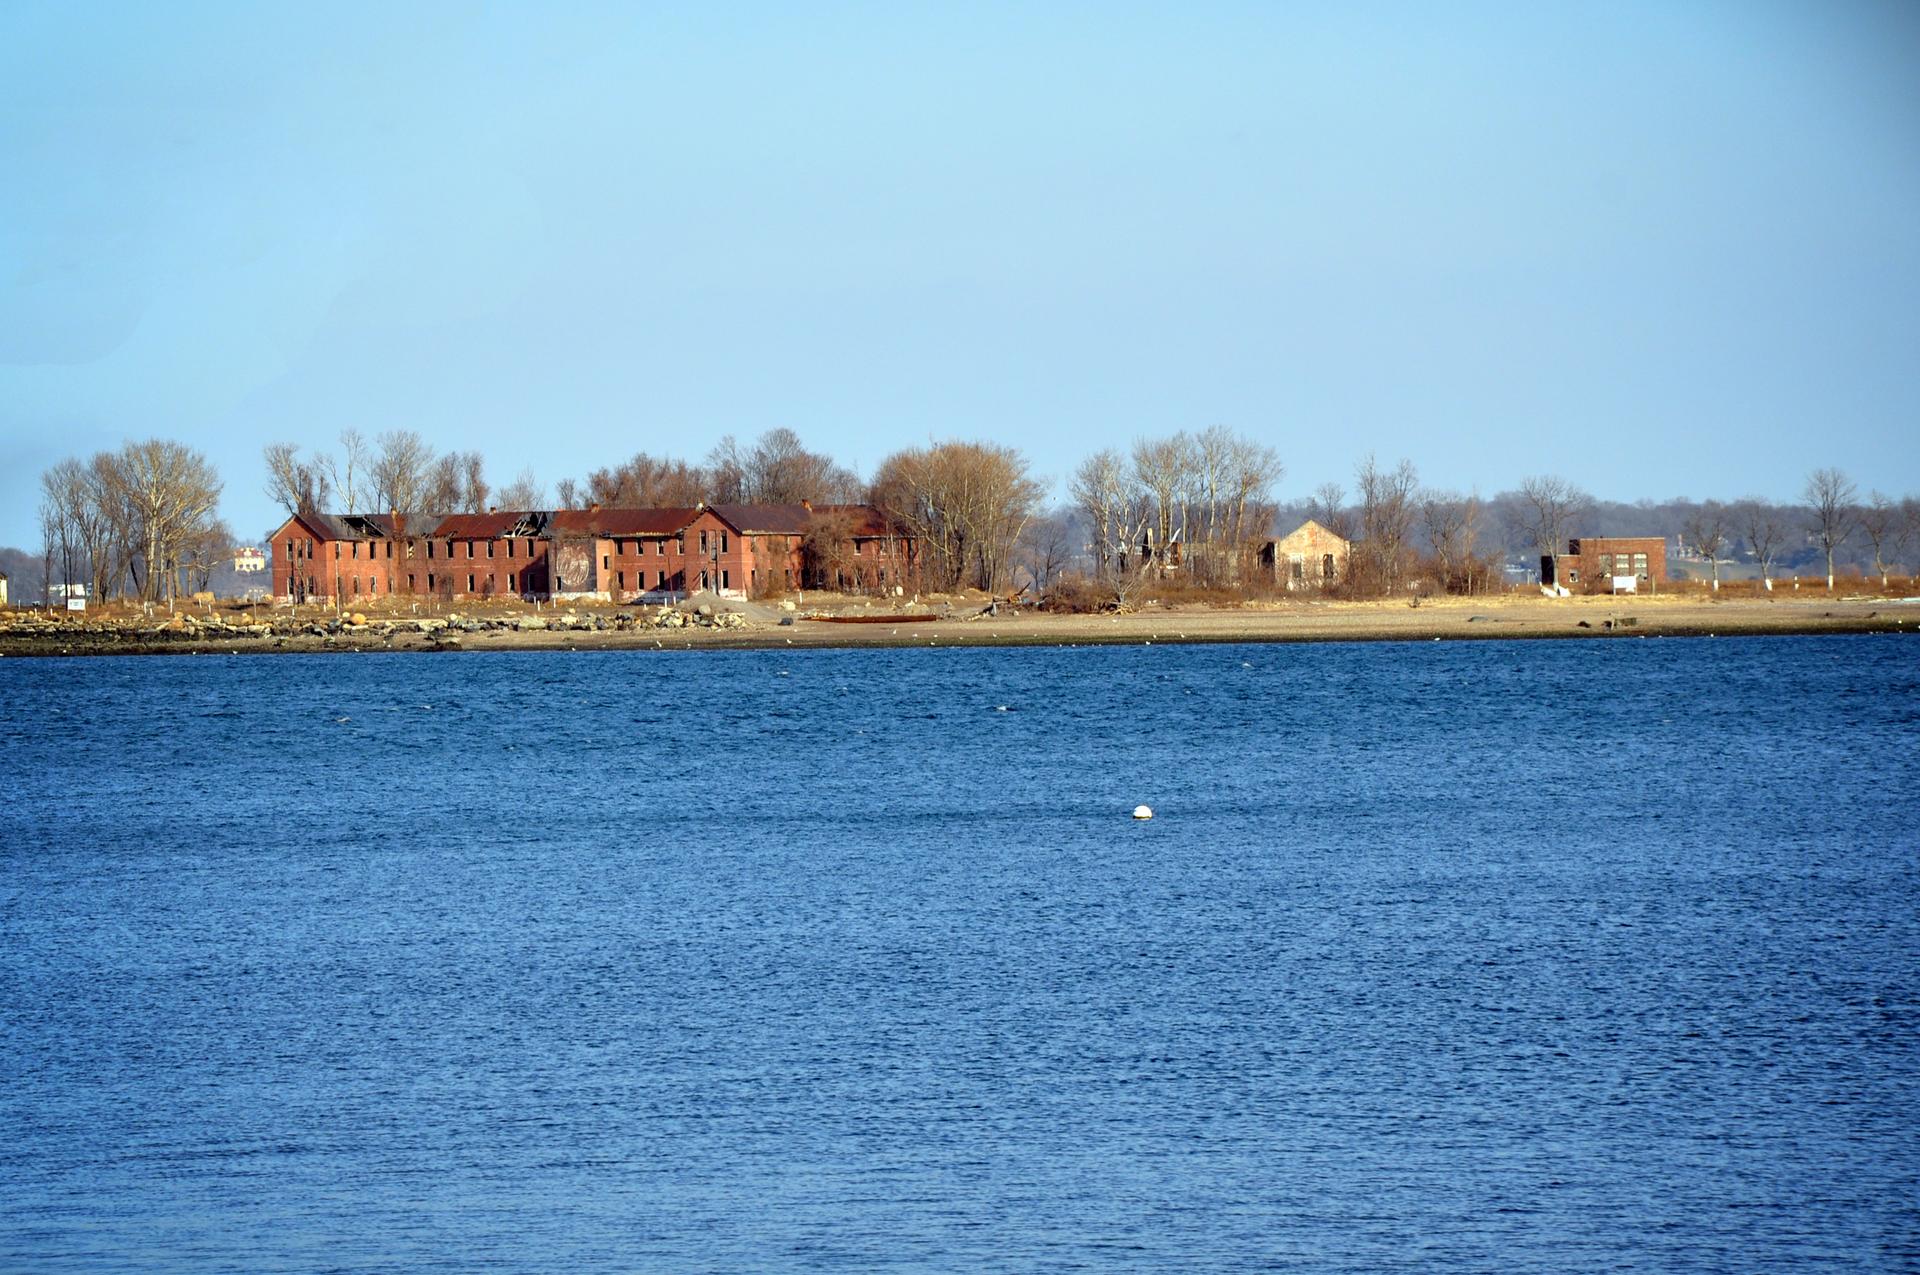 Hart Island as seen from City Island in New York borough of the Bronx in 2009.